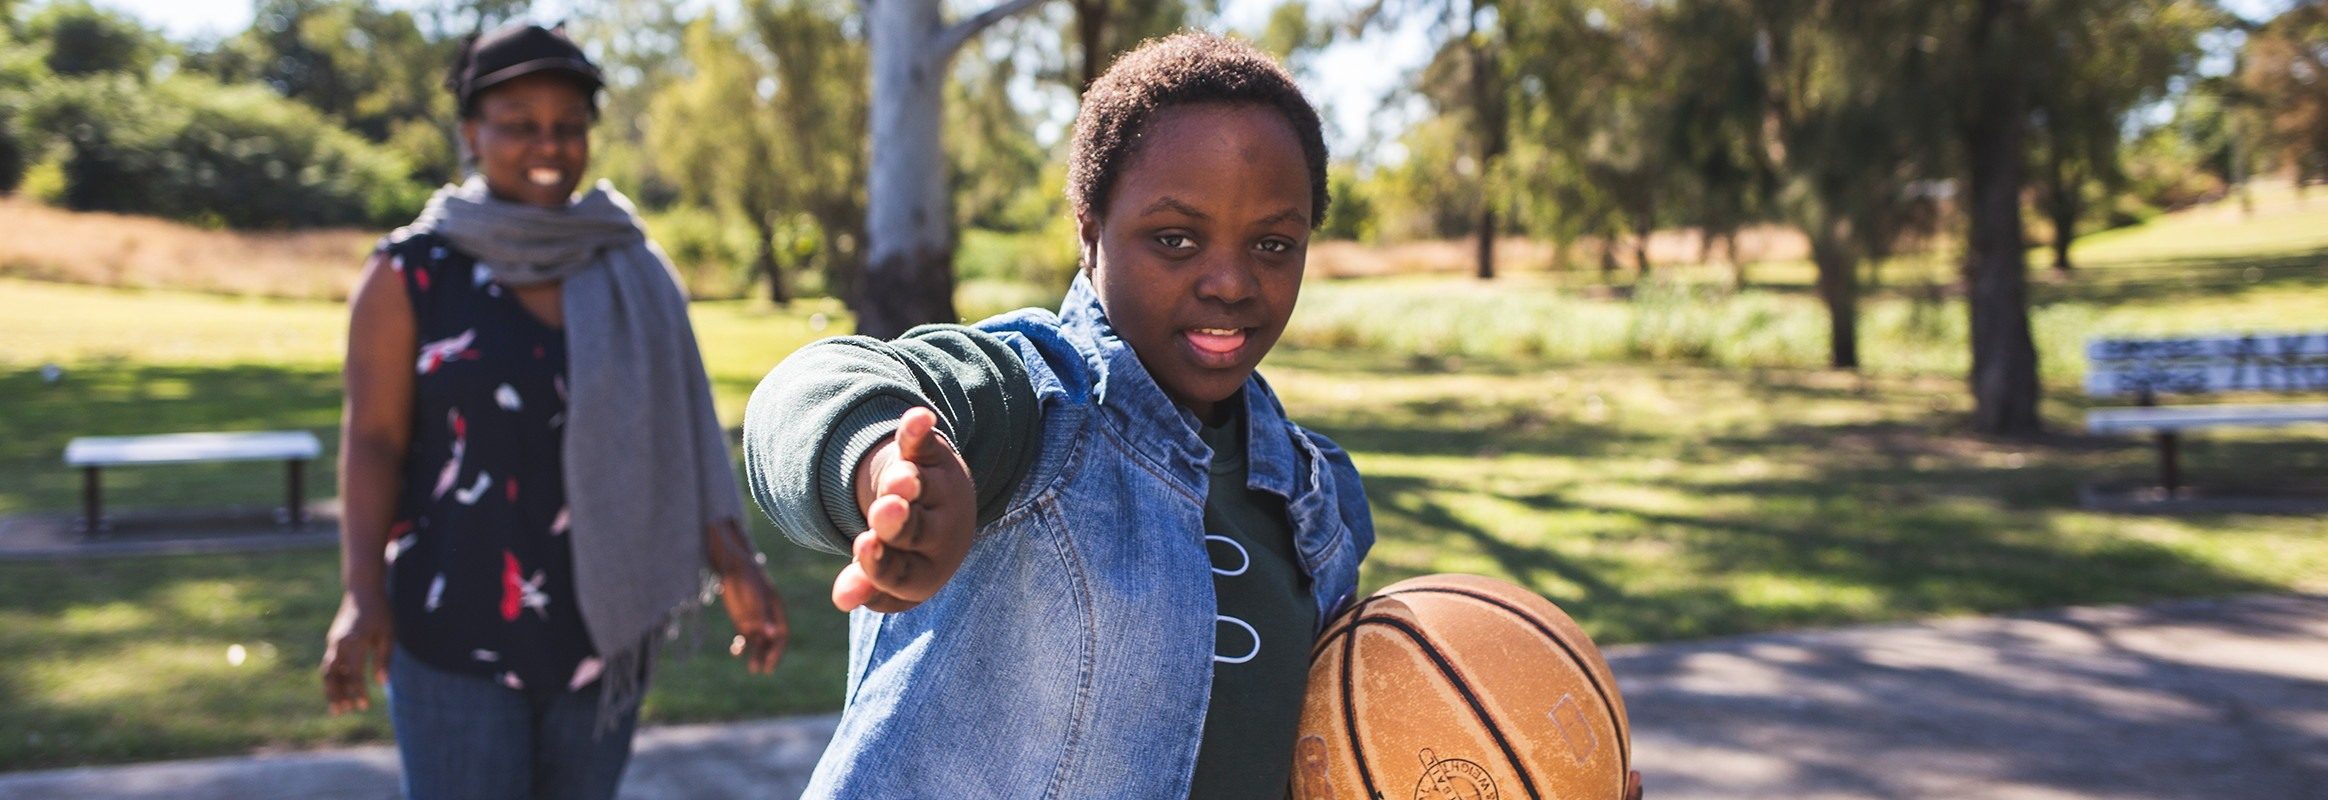 Bonita, a Malawian teenage girl on the basketball court, gesturing to the camera, with another black woman on the court in the background